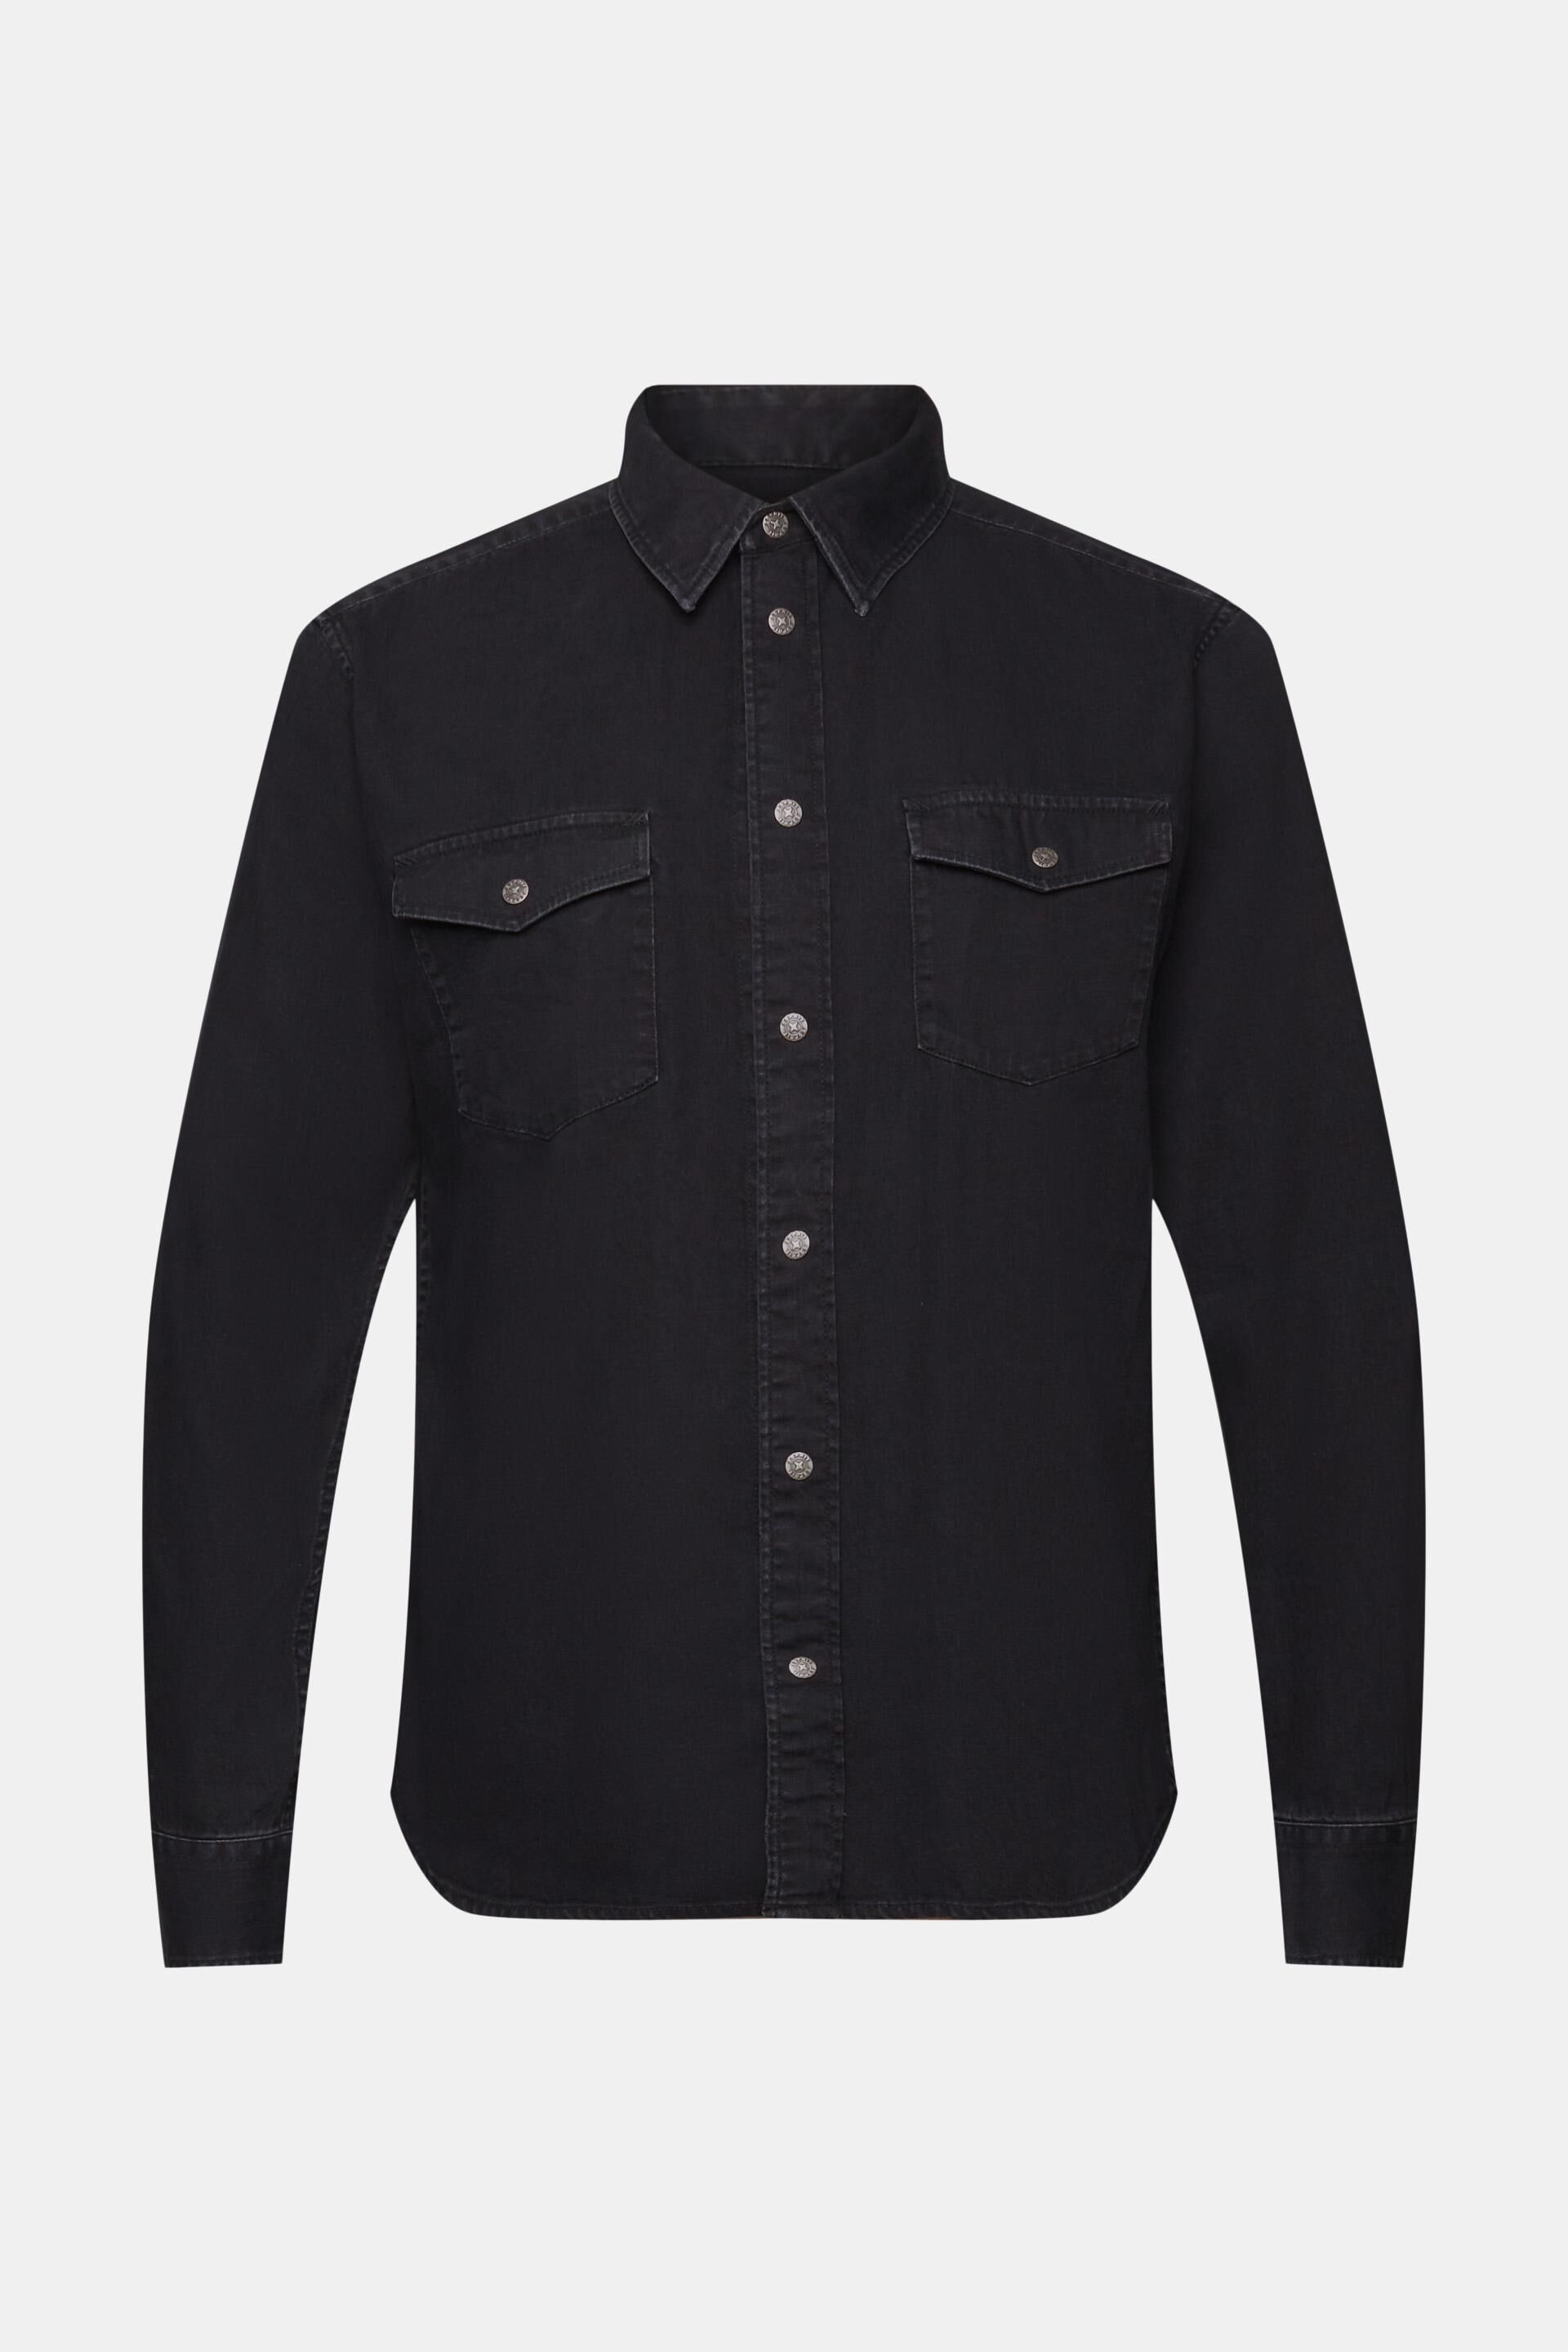 Urbano Fashion Men Washed Casual Black Shirt - Buy Urbano Fashion Men Washed  Casual Black Shirt Online at Best Prices in India | Flipkart.com